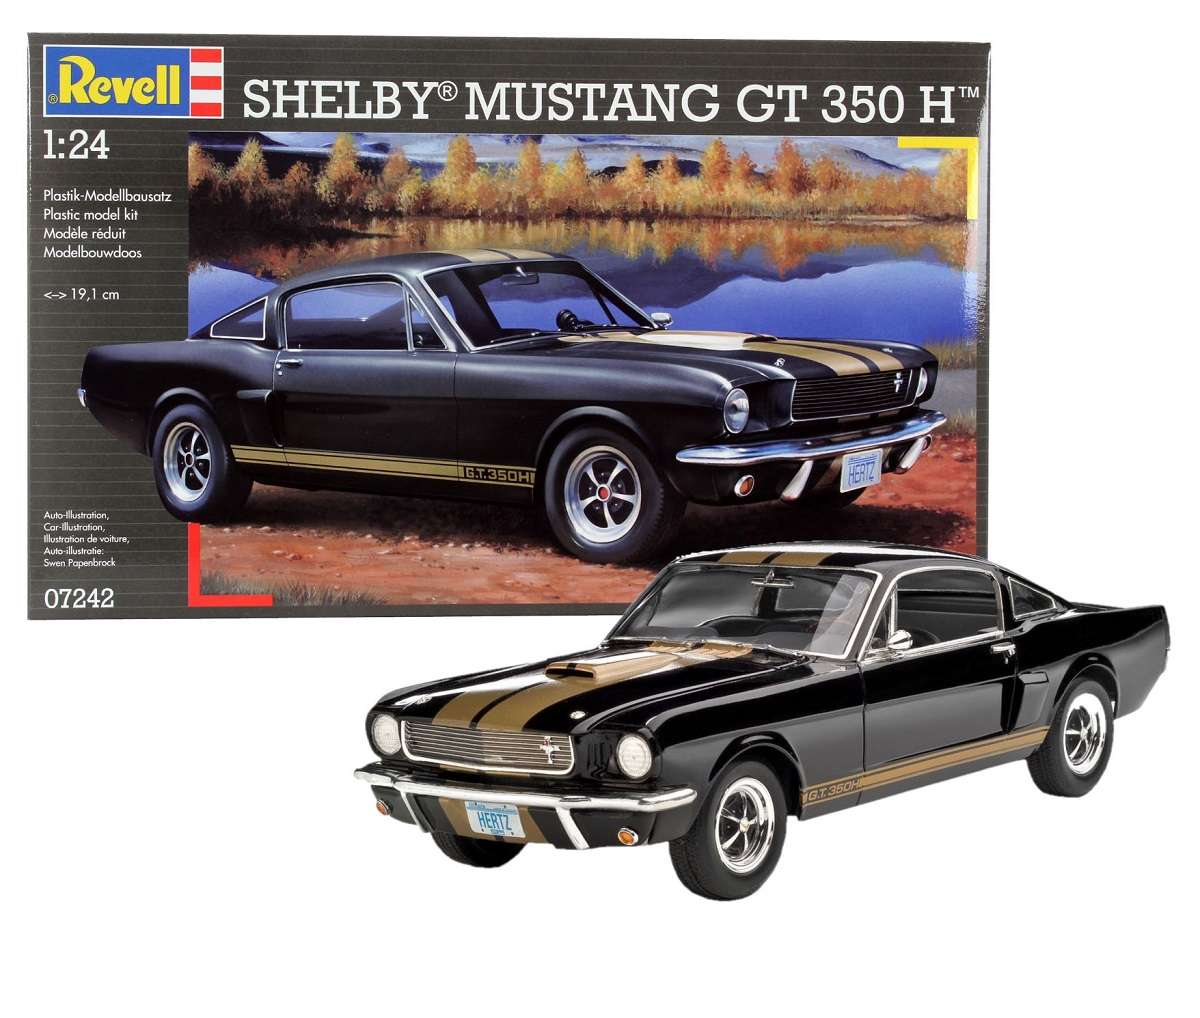 Revell Autos Shelby Mustang GT 350 H 1:24 07242